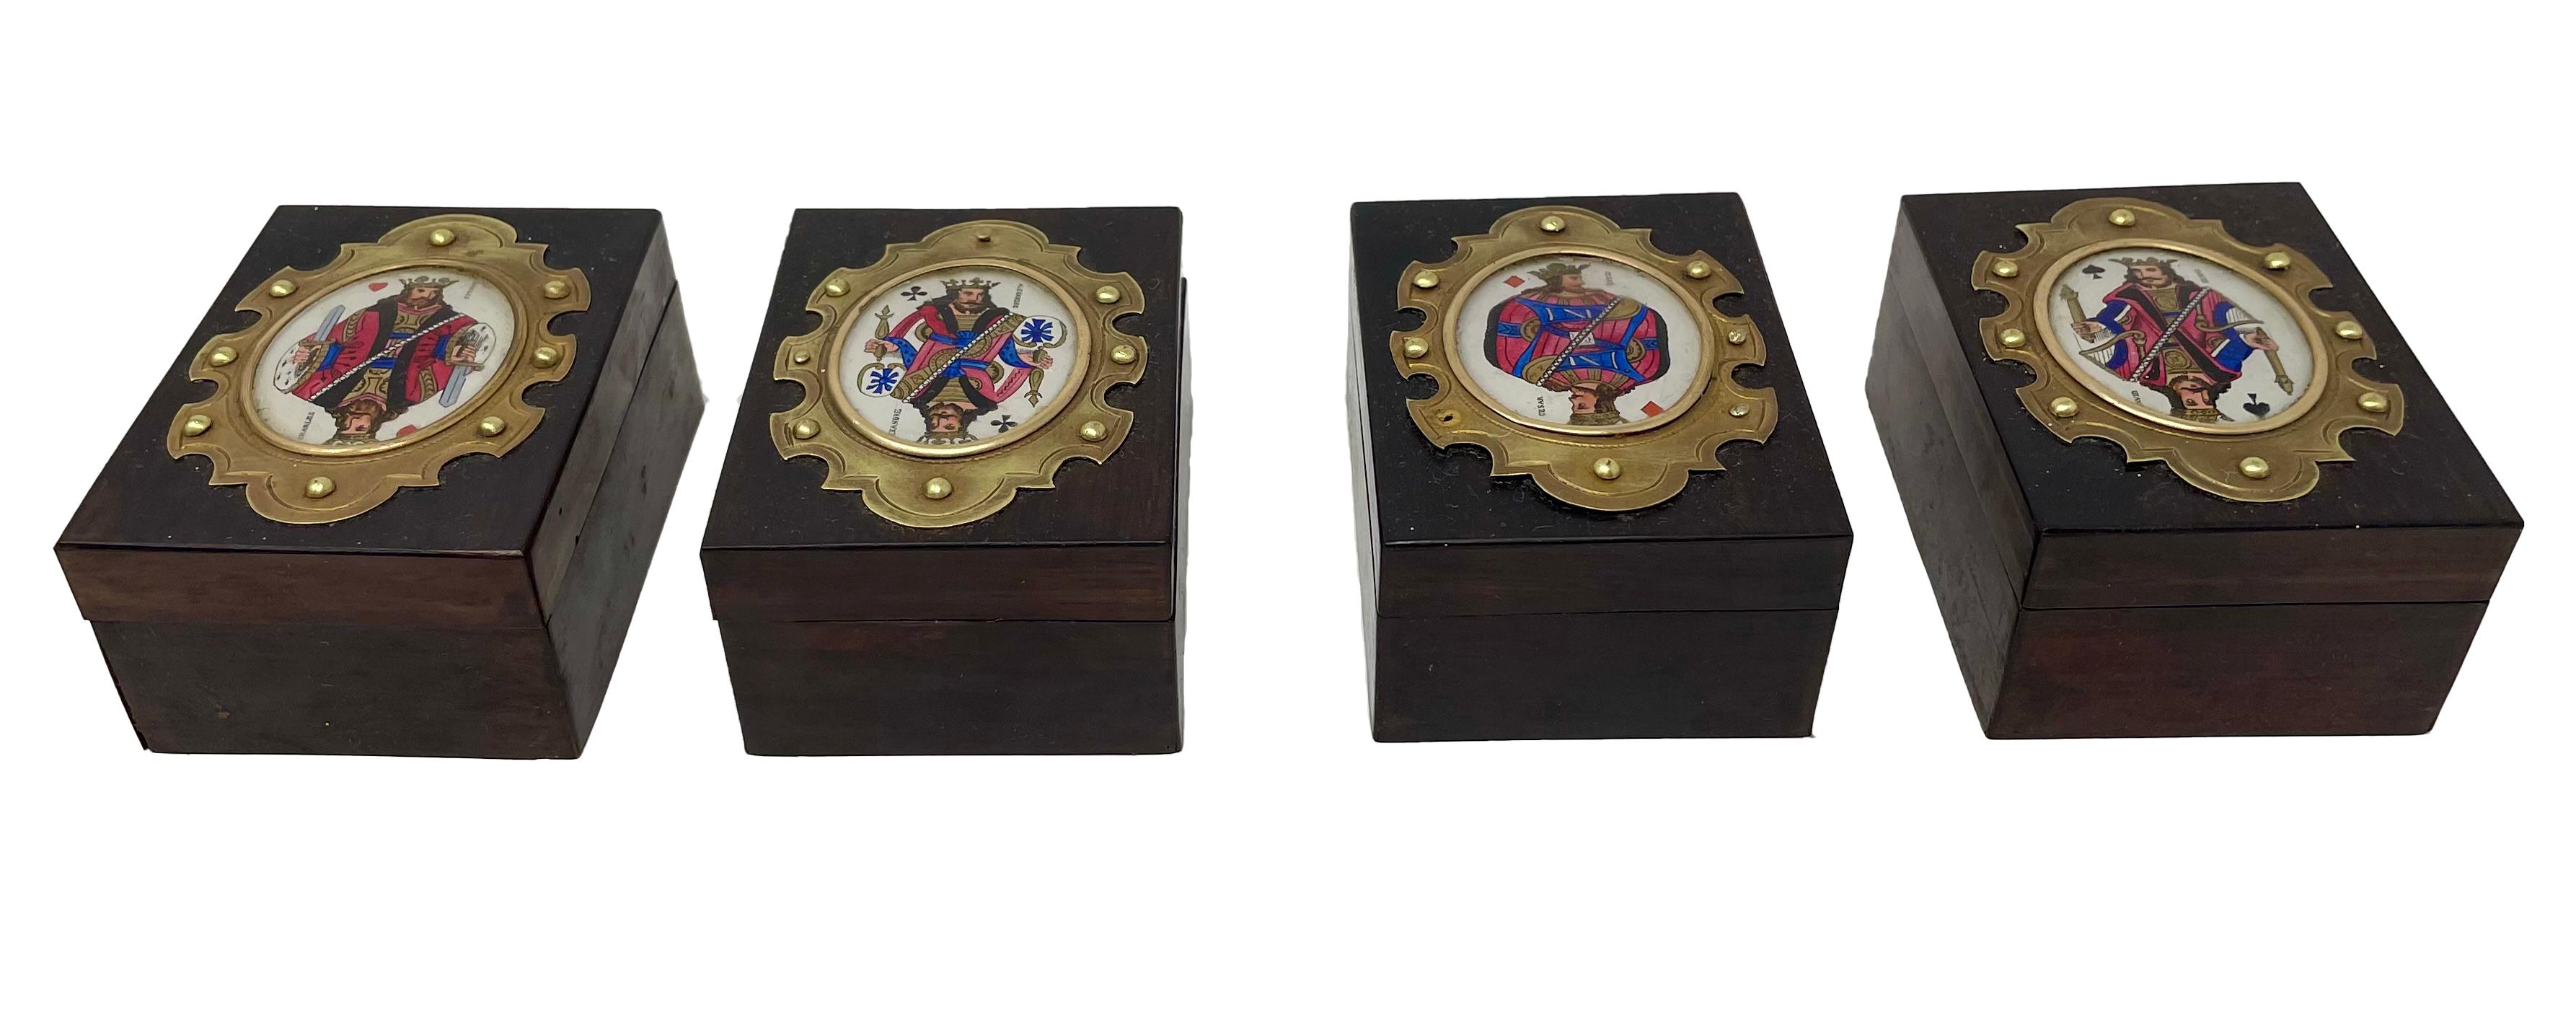 Antique English Brass Mounted Games Set Box Inset with Colorful Enamels, Ca 1890 For Sale 1